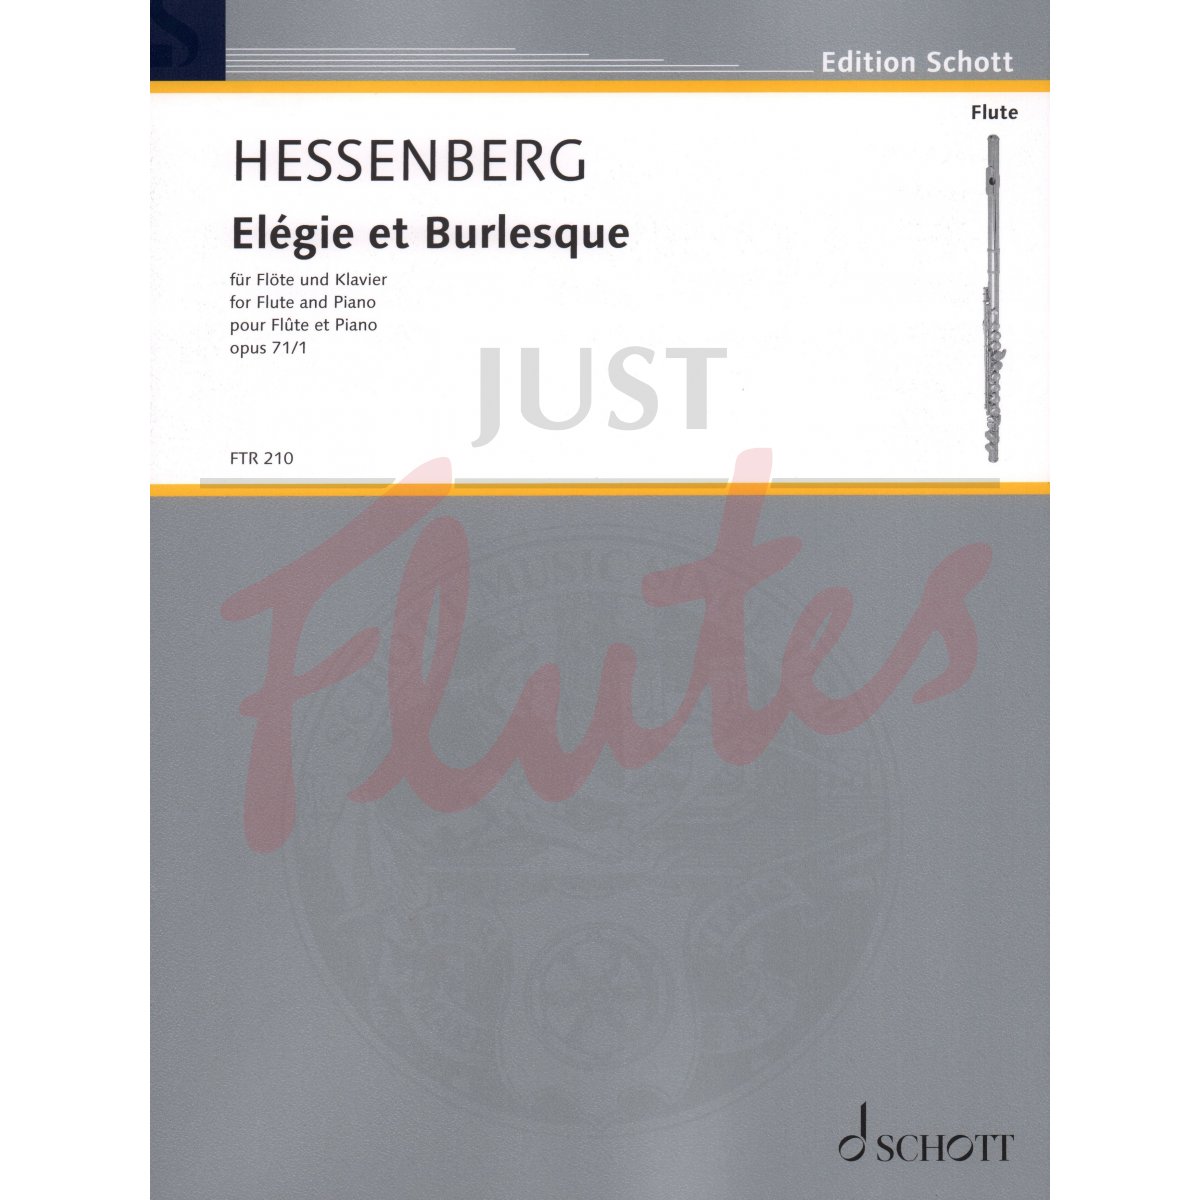 Elegie and Burlesque for Flute and Piano